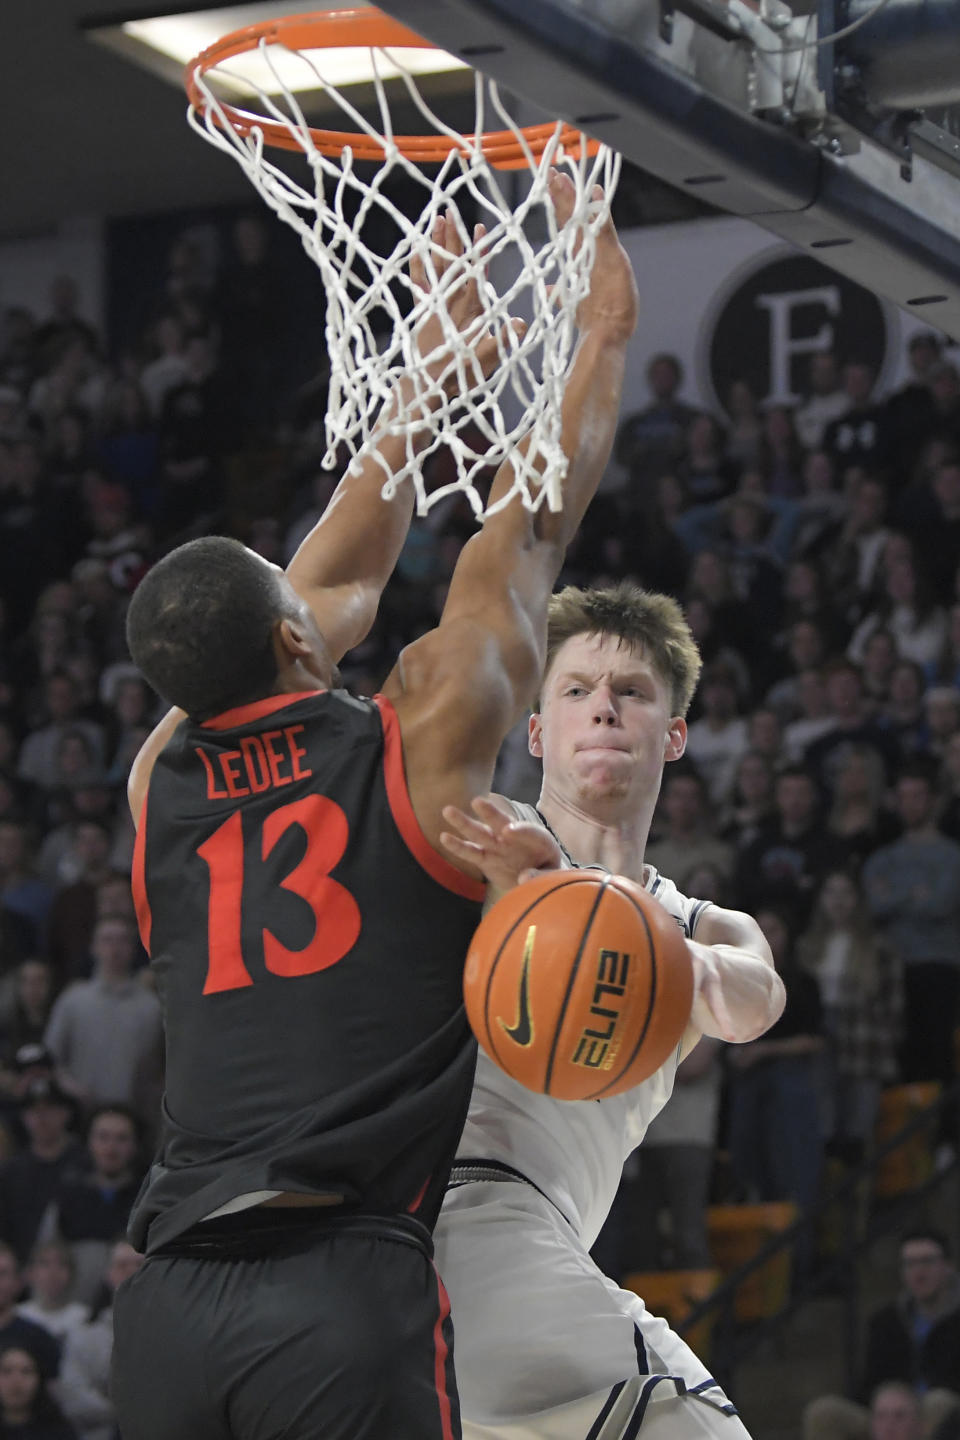 Utah State guard Max Shulga, right, passes the ball past San Diego State forward Jaedon LeDee (13) during the second half of an NCAA college basketball game Wednesday, Feb. 8, 2023, in Logan, Utah. (AP Photo/Eli Lucero)